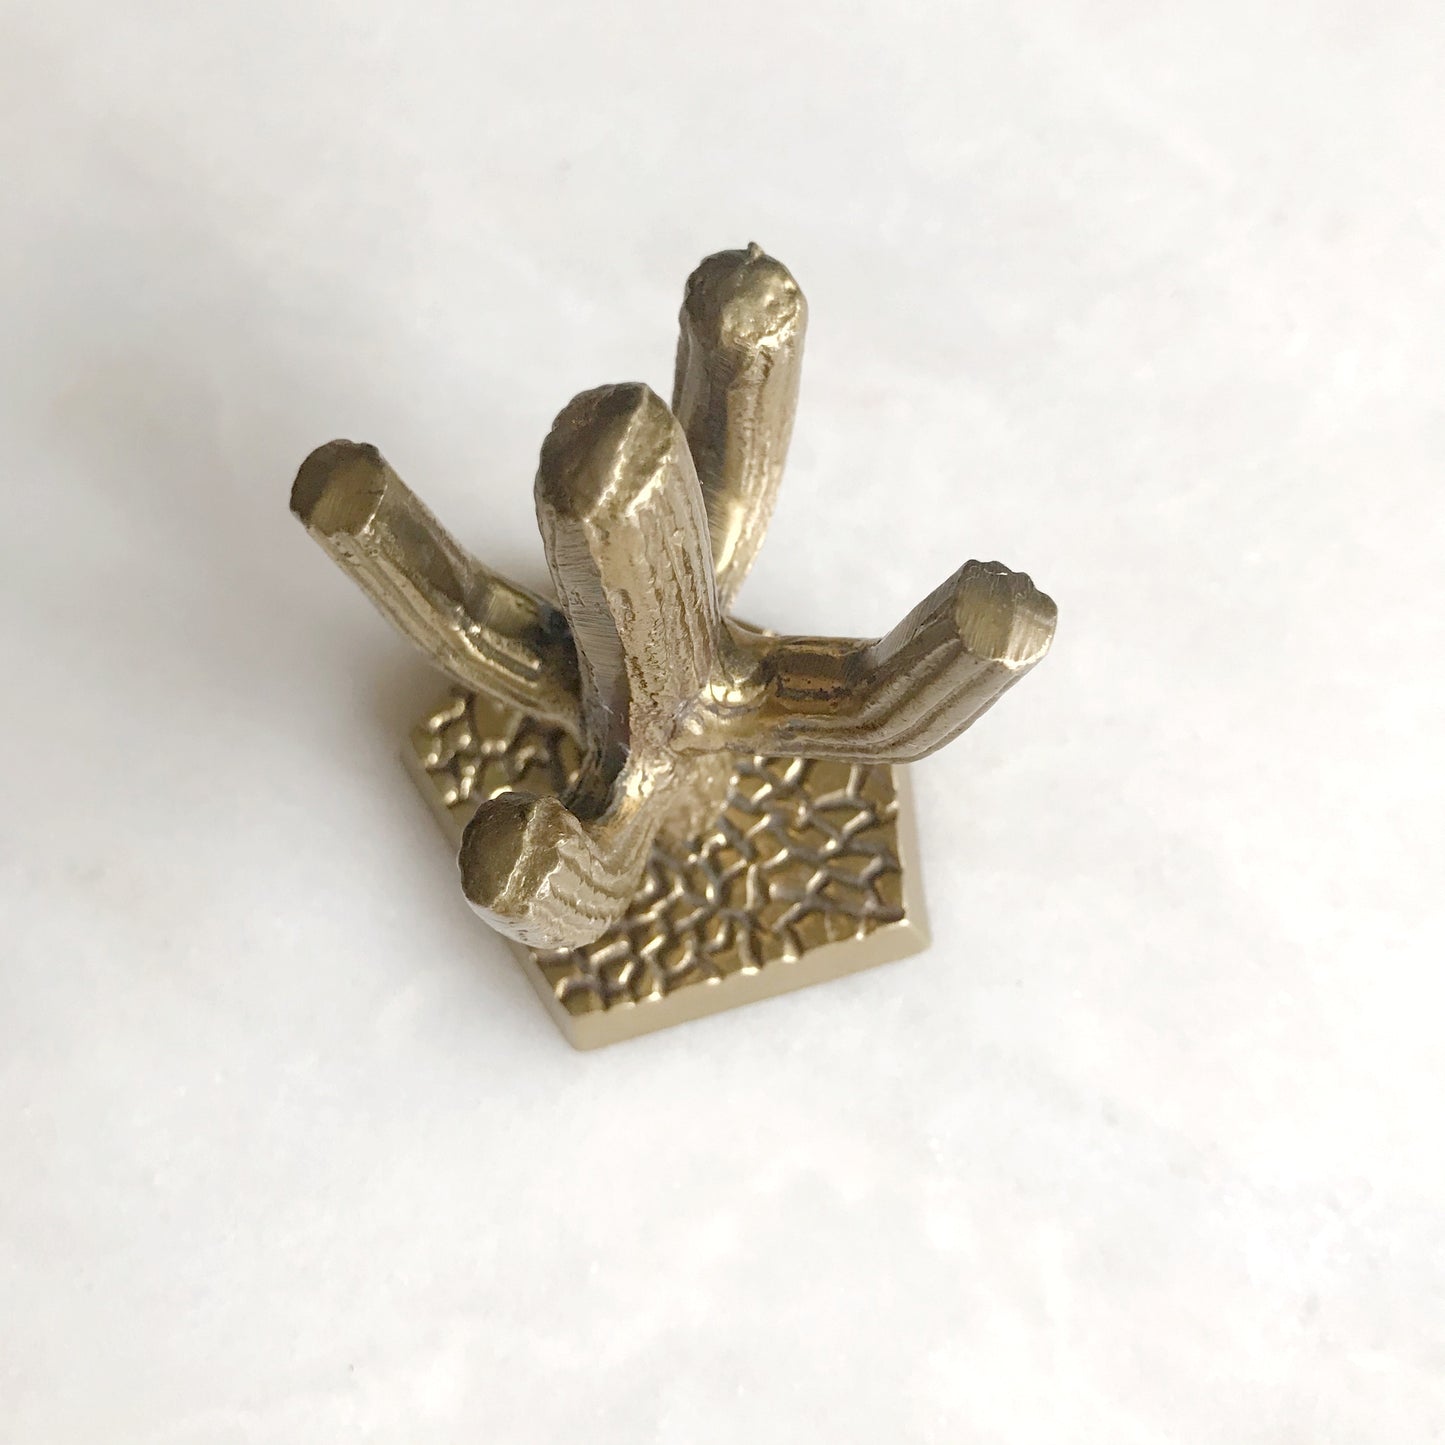 Small Vintage Solid Brass Cactus / Ring Holder